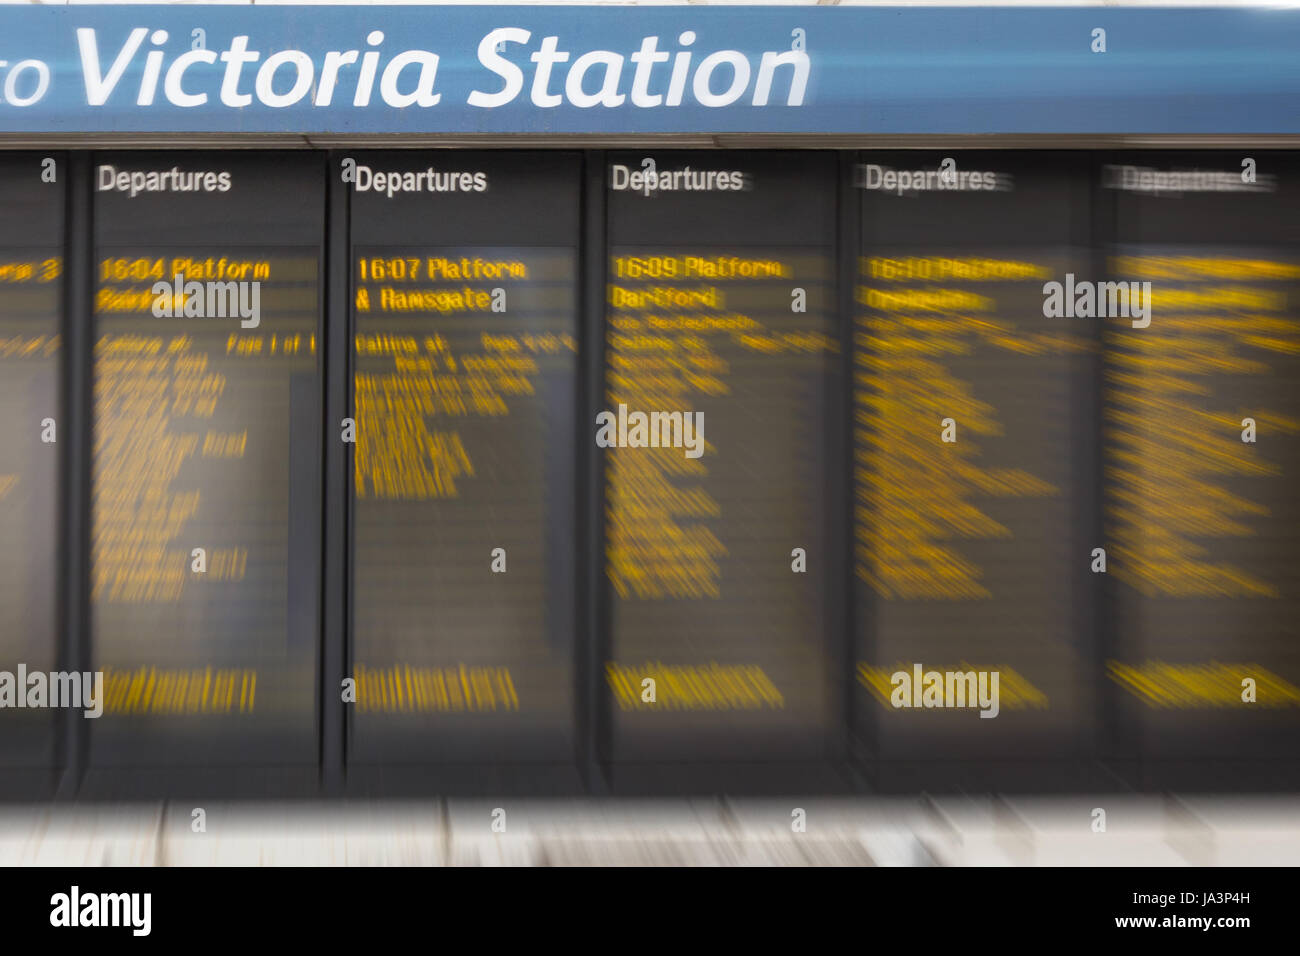 London, England - may 30, 2017: Departures board display at Victoria Station in London, England. Stock Photo